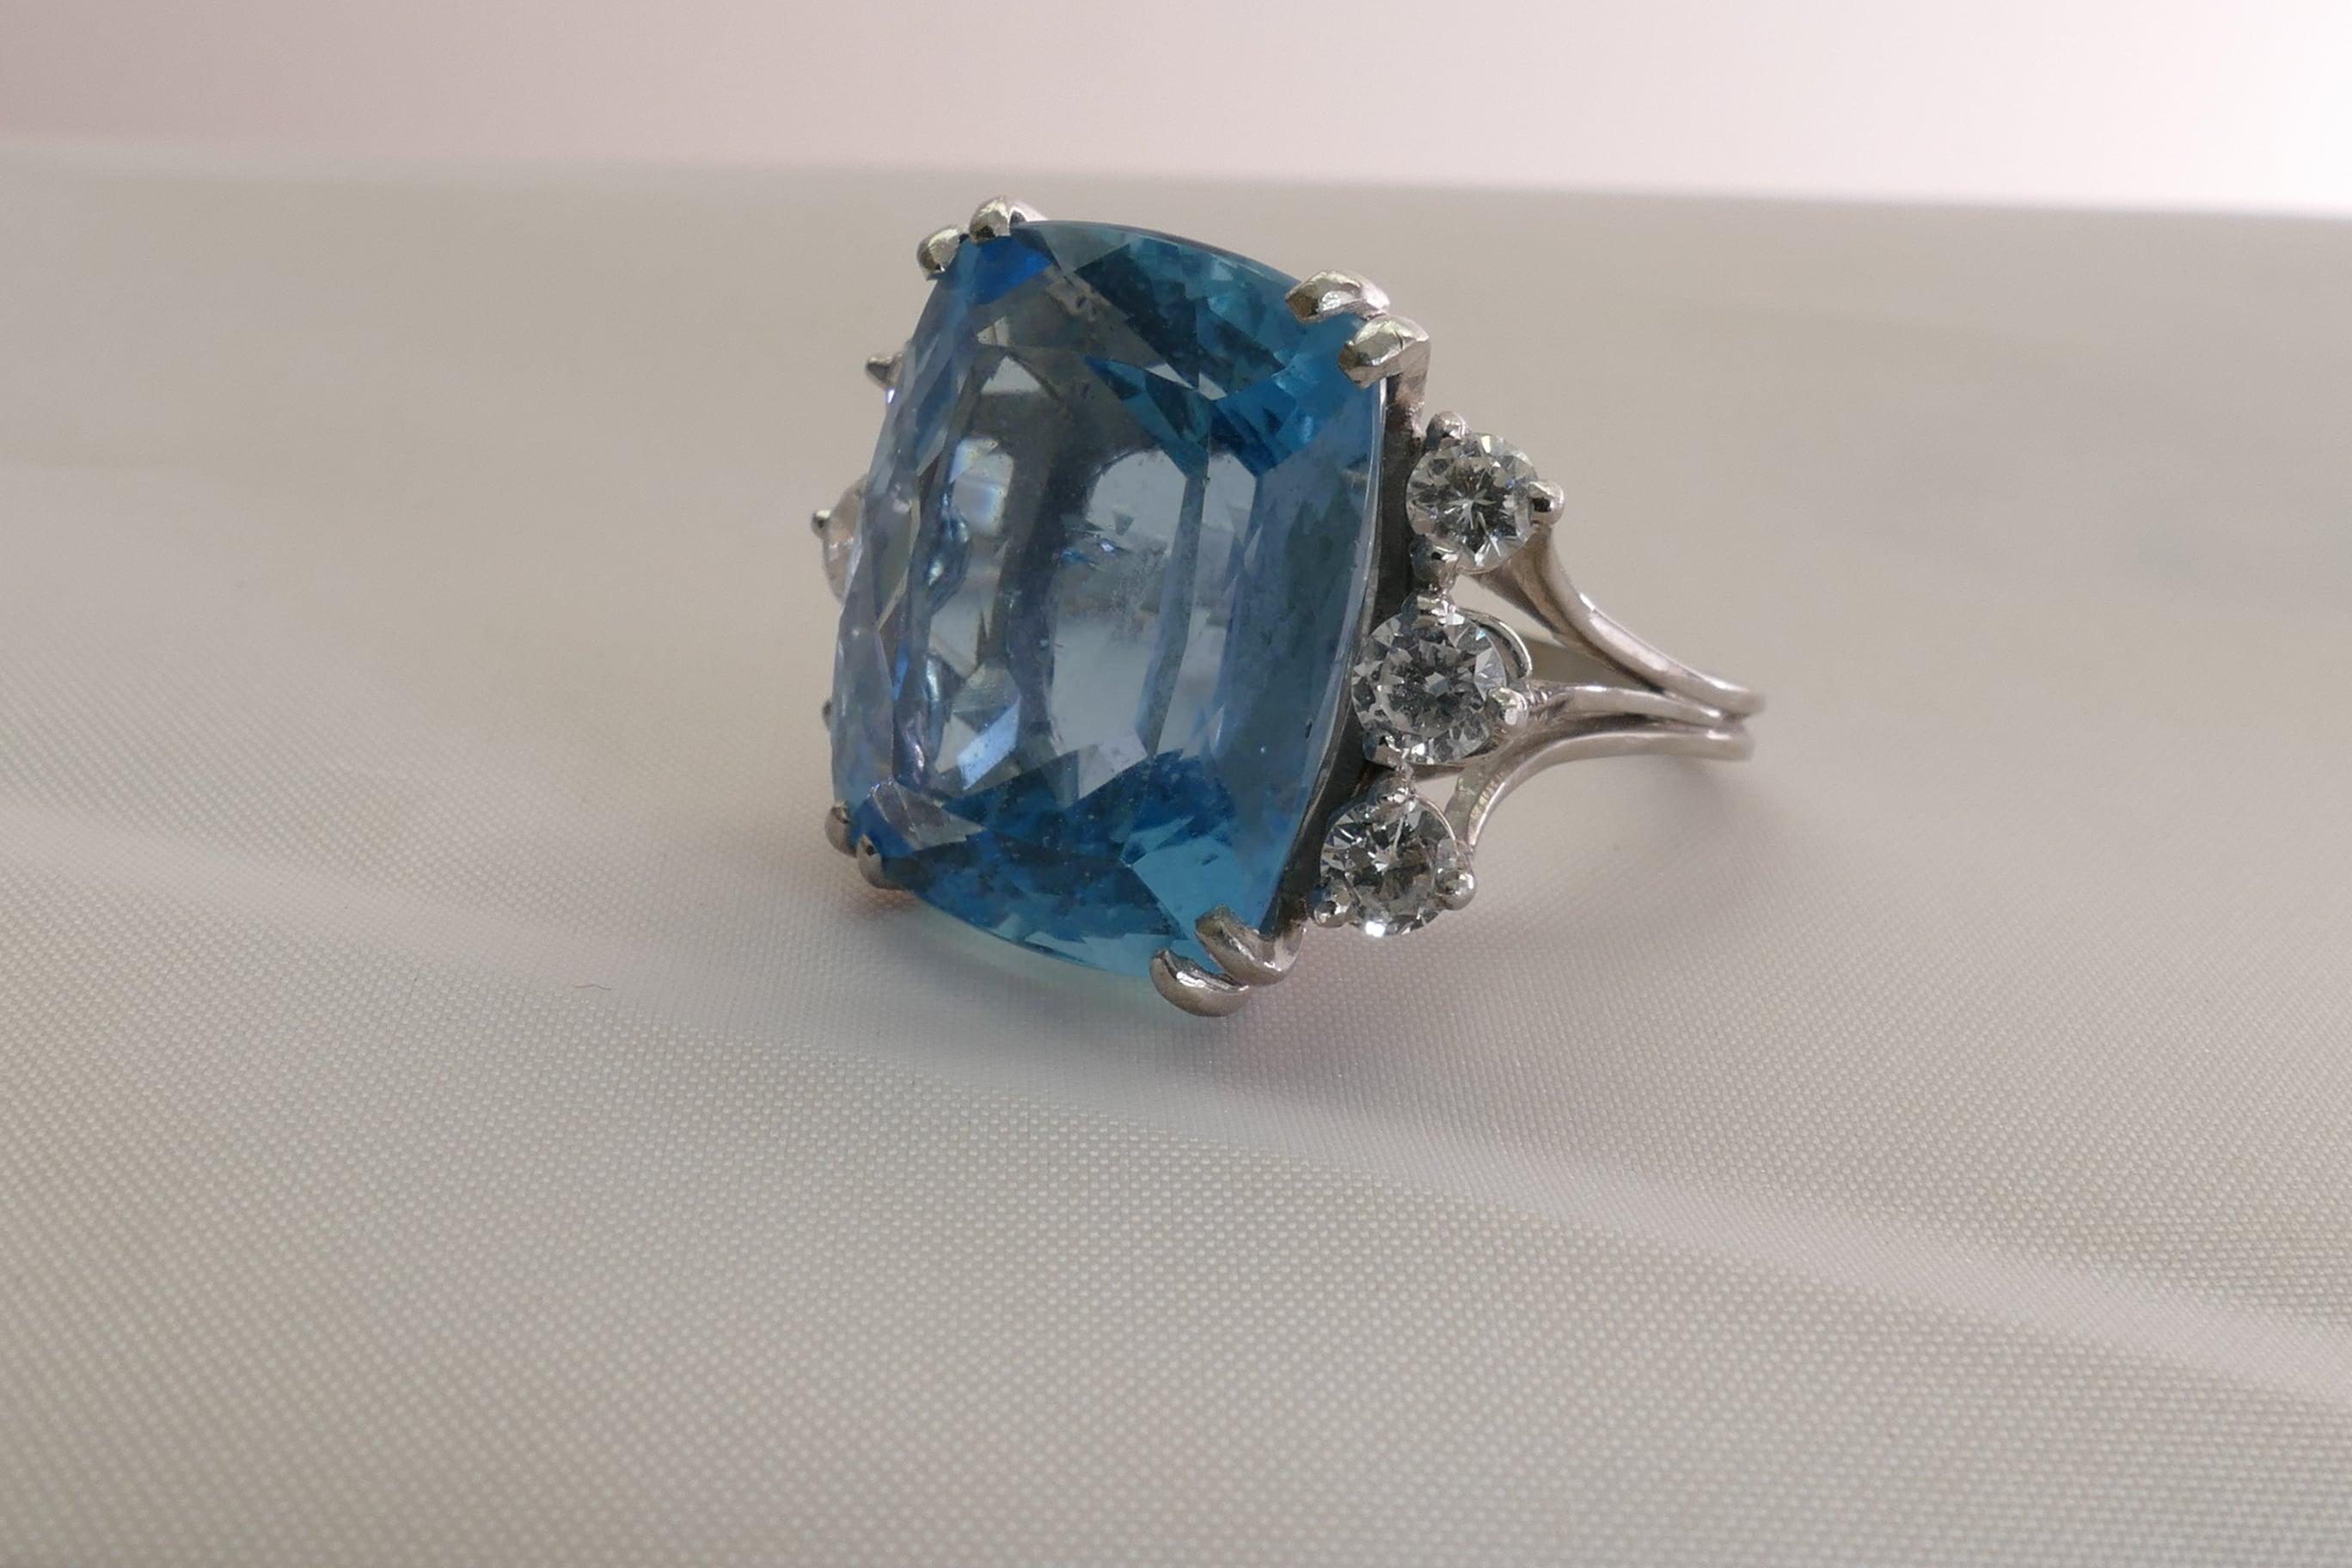 Cushion Cut Aquamarine Ring, 4 split claw set in Platinum with 6 Round Brilliant Cut Diamonds claw set on triple split shoulders to a 2mm shank. The Stone is an Excellent Blue Colour with one inclusion visible to the naked eye.
6 Diamonds close to 1